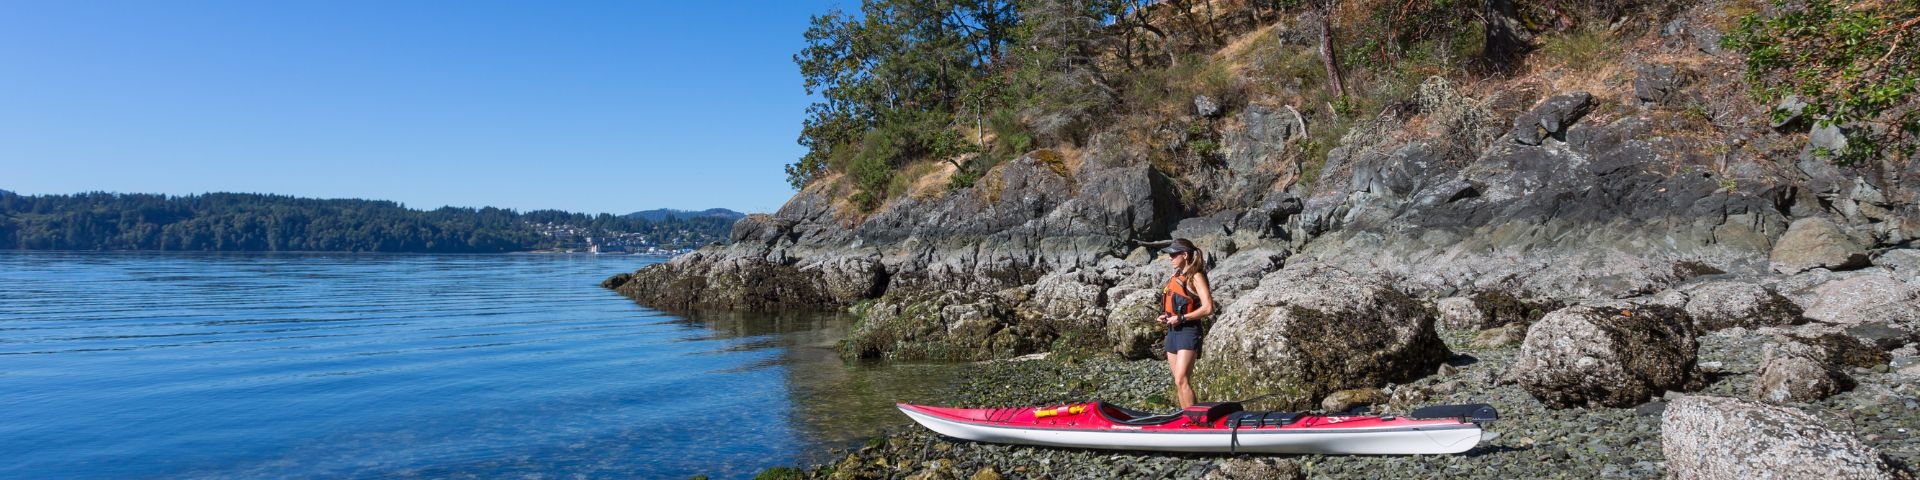 Kayaker standing on ocean shore with bright blue sky in background